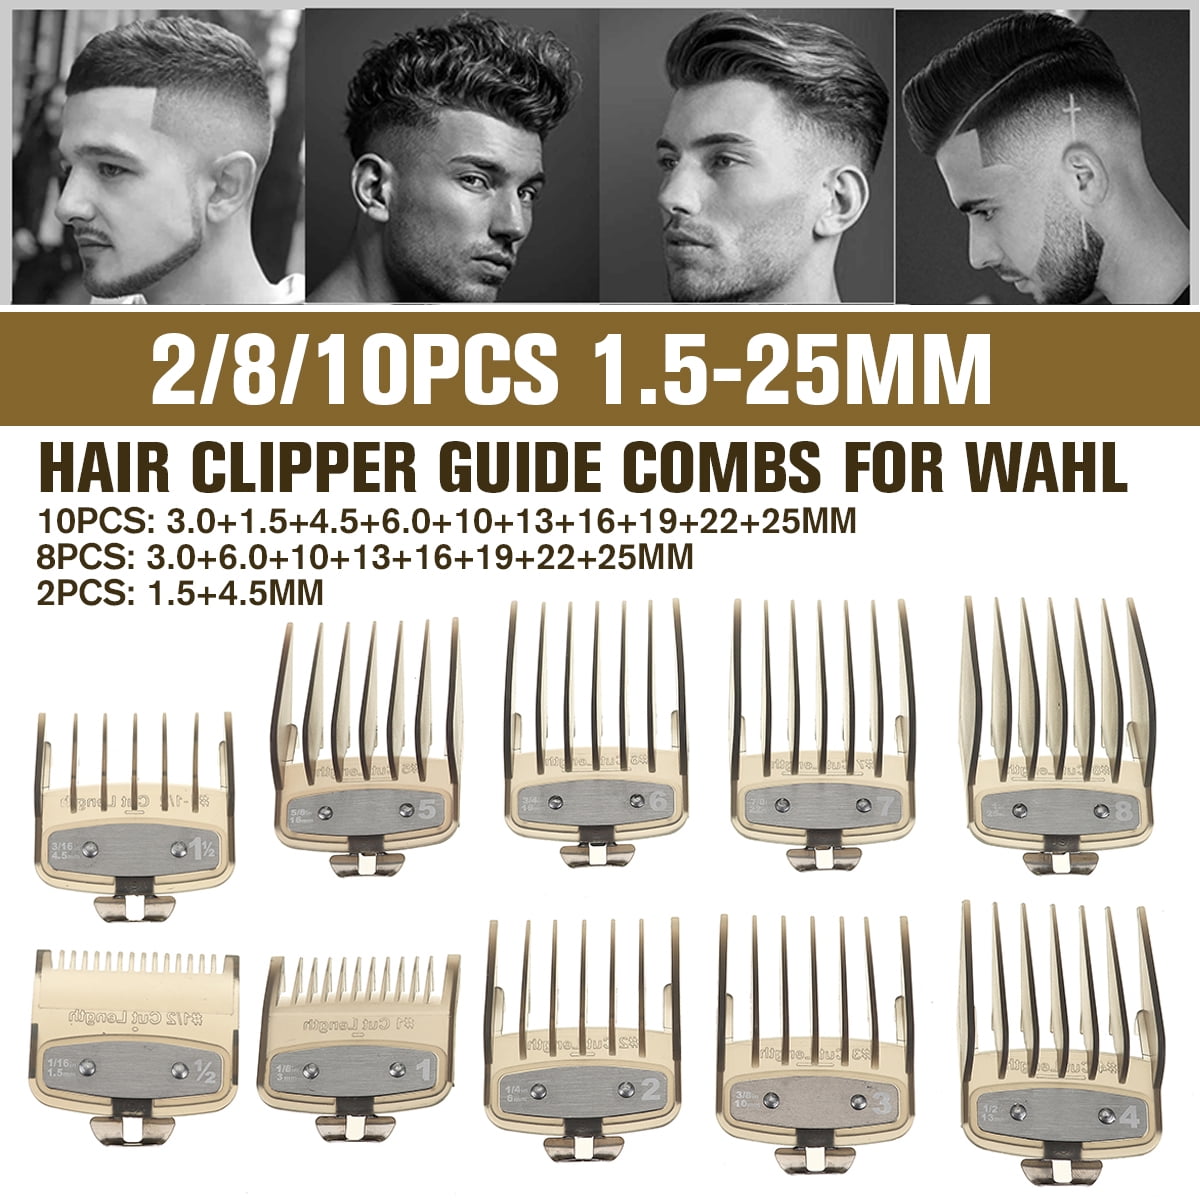 0 guard for wahl clippers